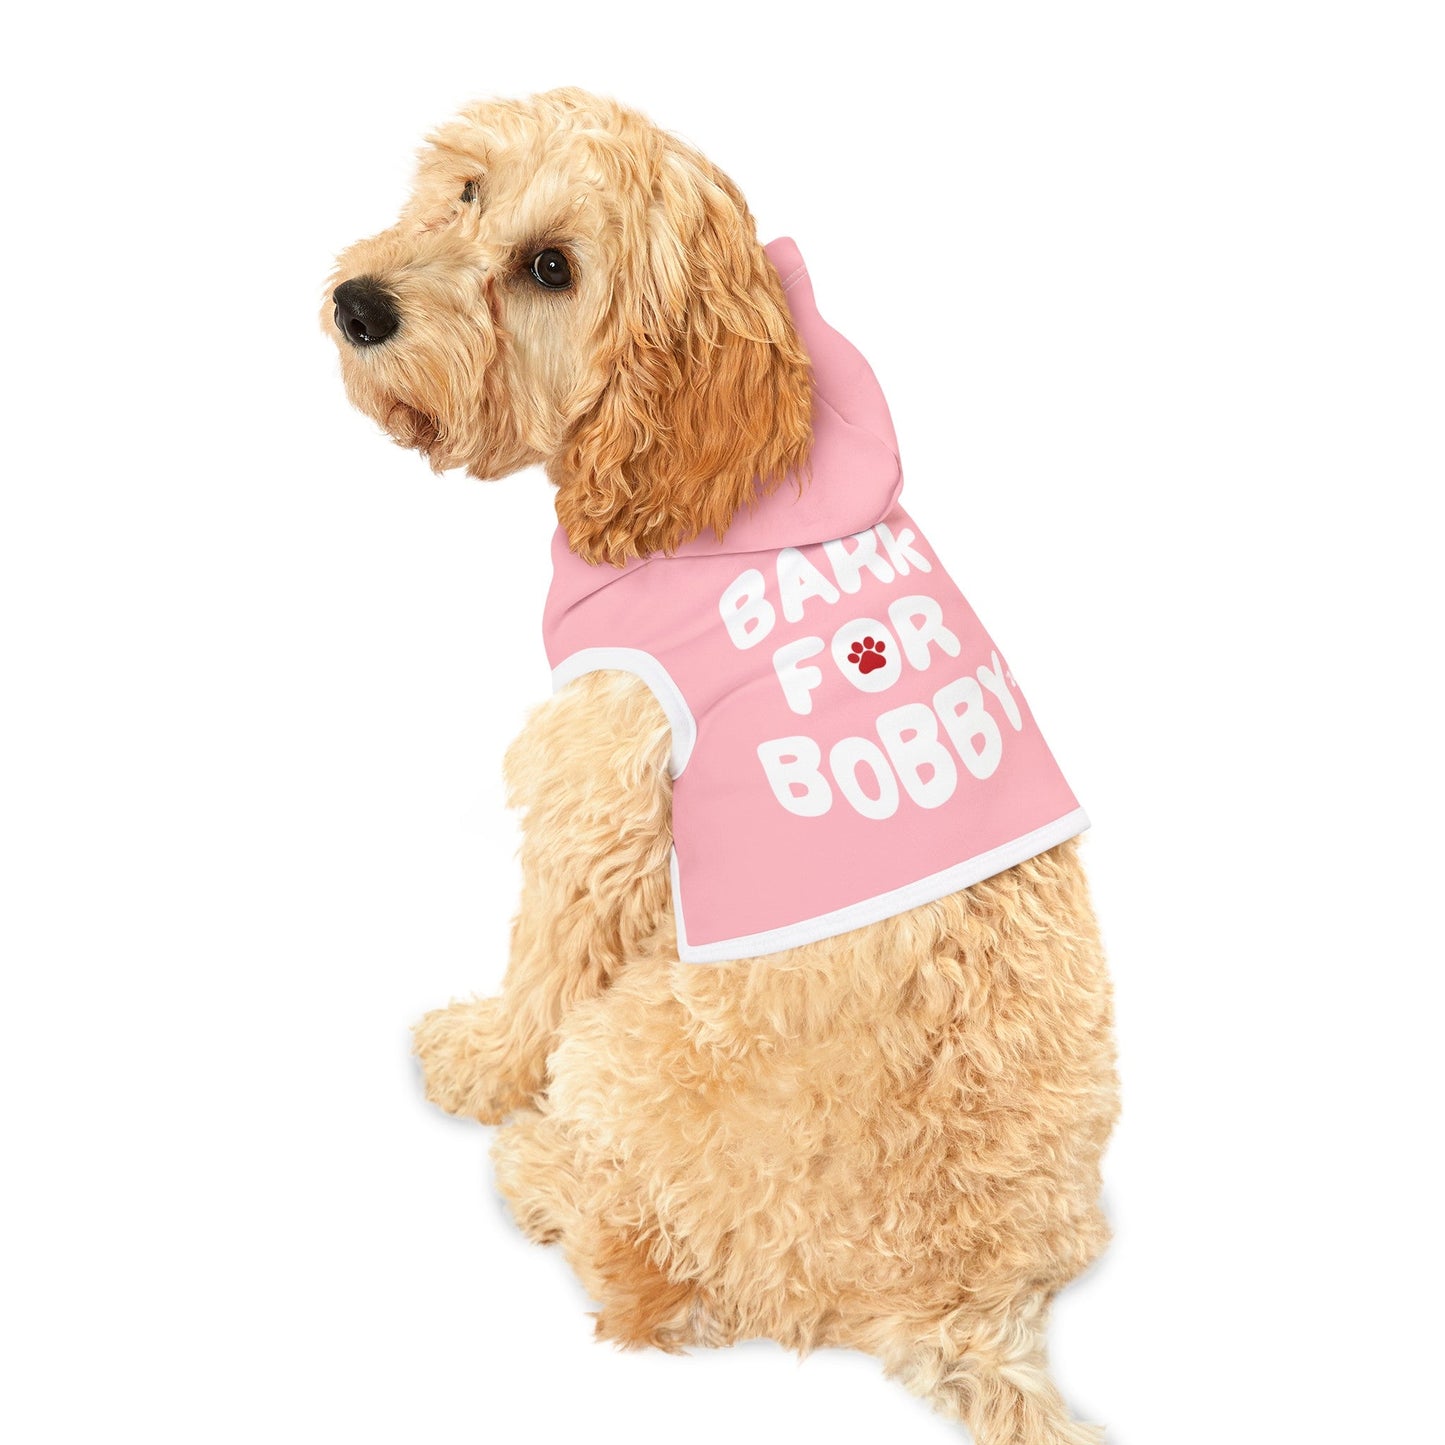 Bark for Bobby Spring Pet Hoodie - TEAM KENNEDY. All rights reserved